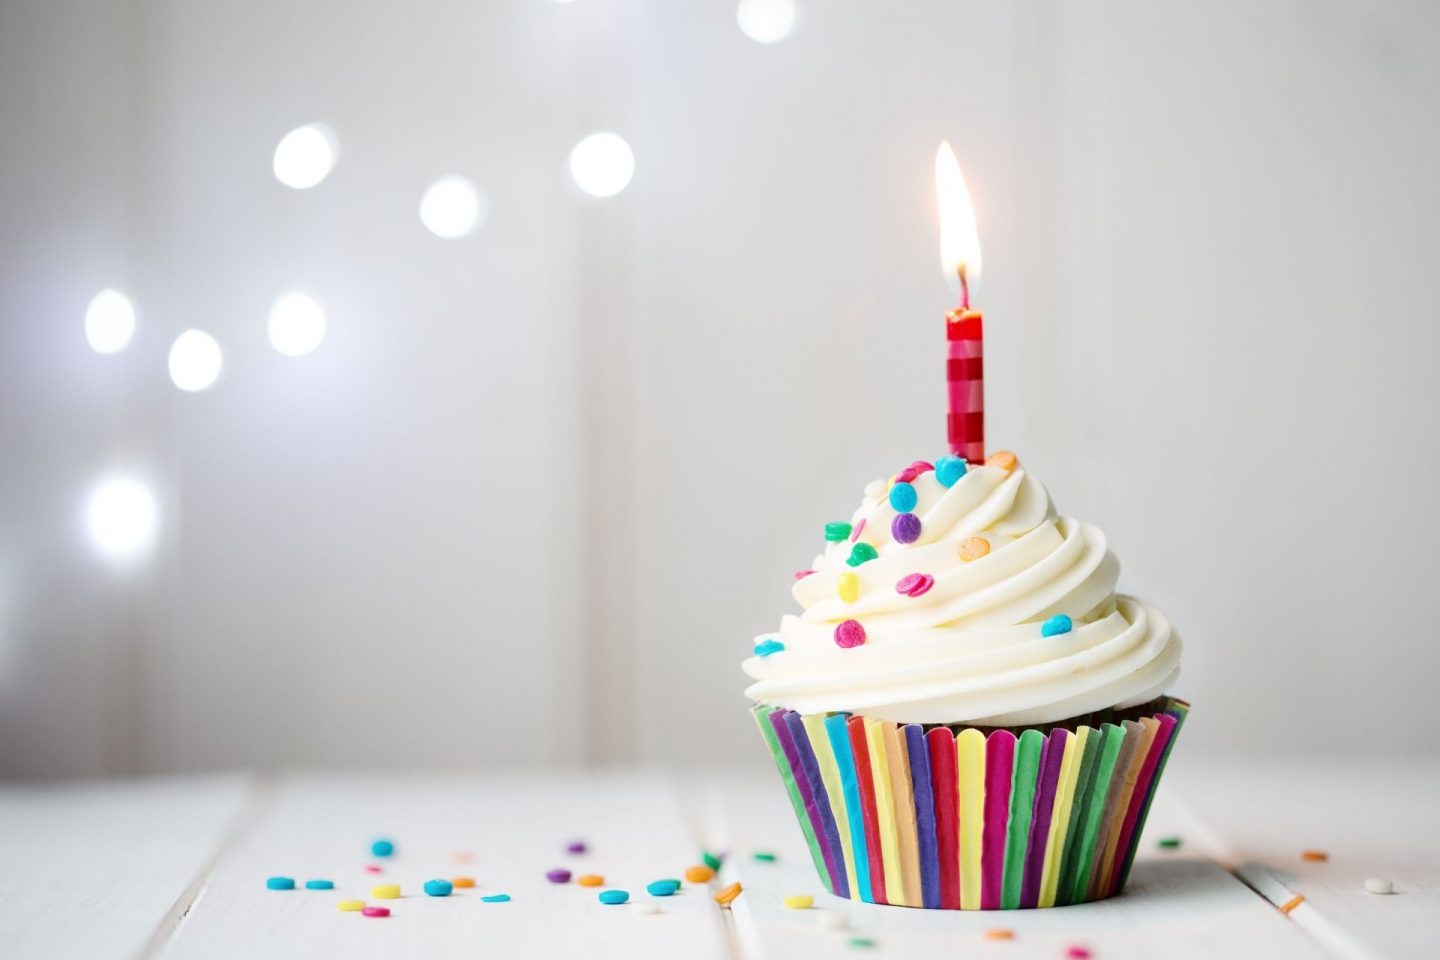 A photo of a cupcake in a rainbow coloured case with colourful sprinkles and a single red candle. It sits on a white table with a white background, with a few dots of light behind it.